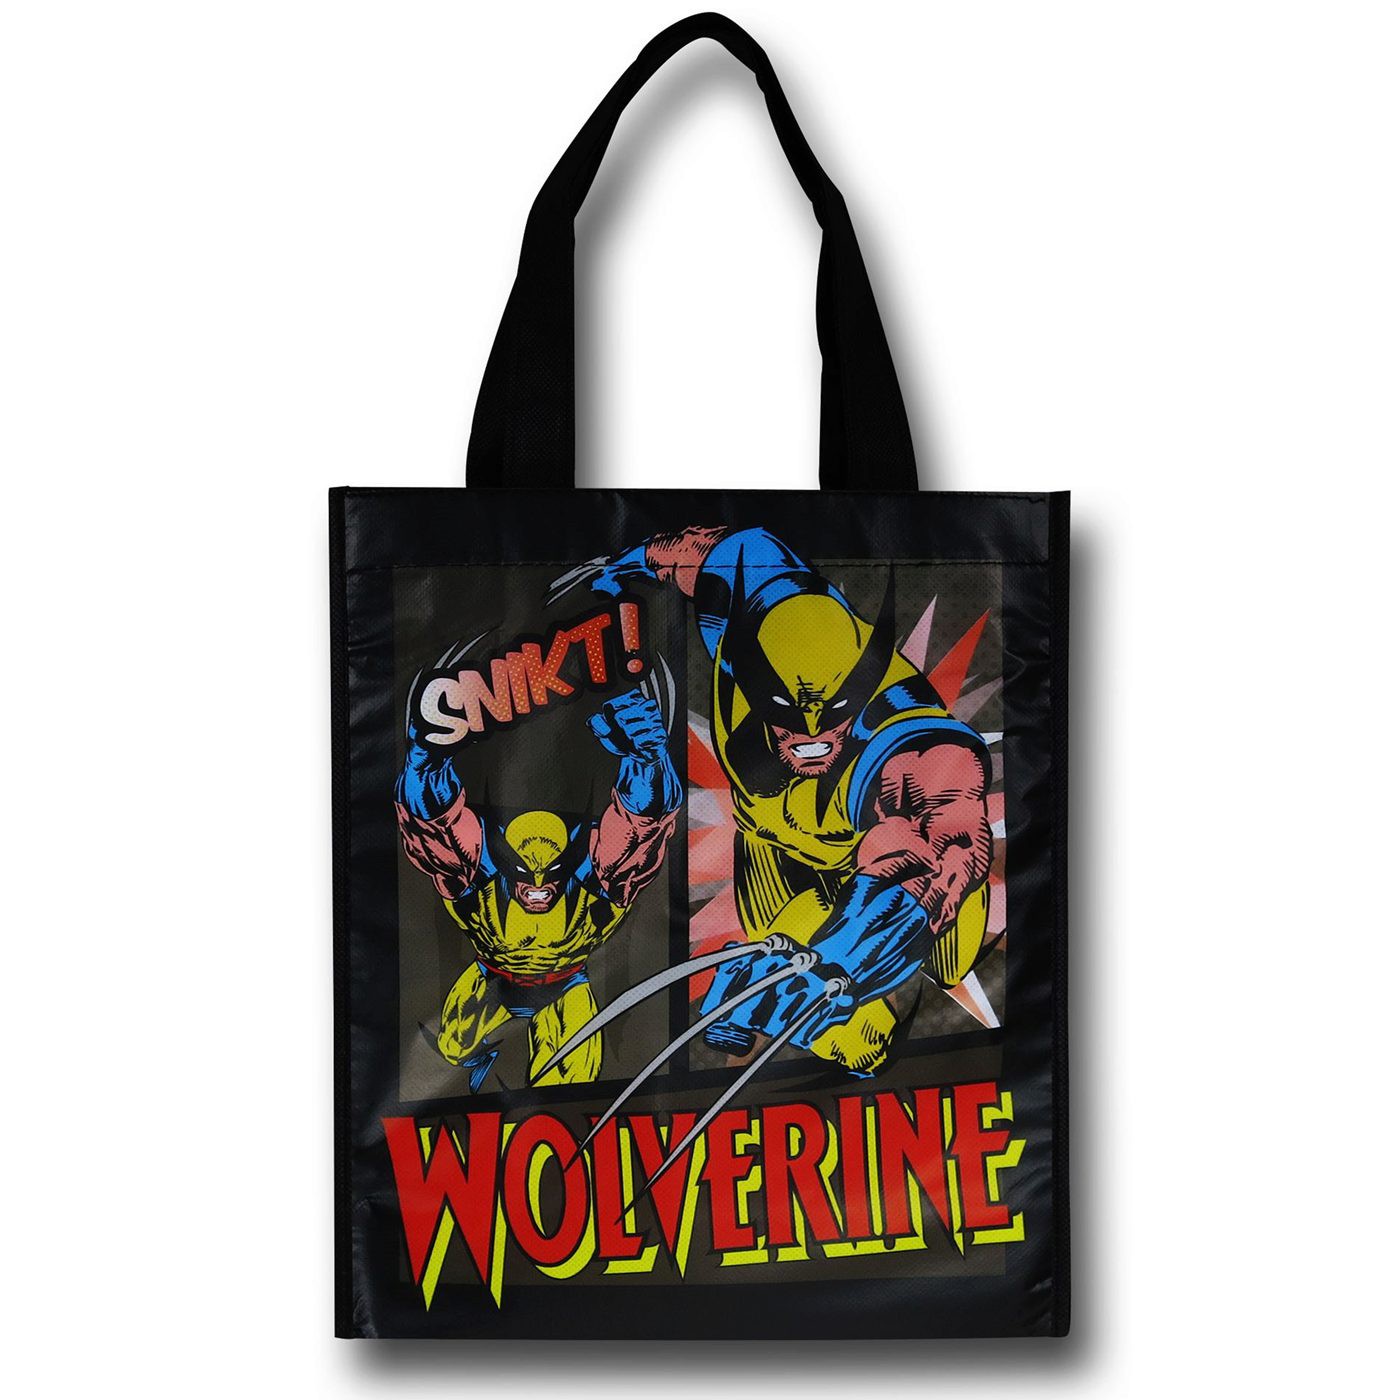 Wolverine Recycled Shopper Tote